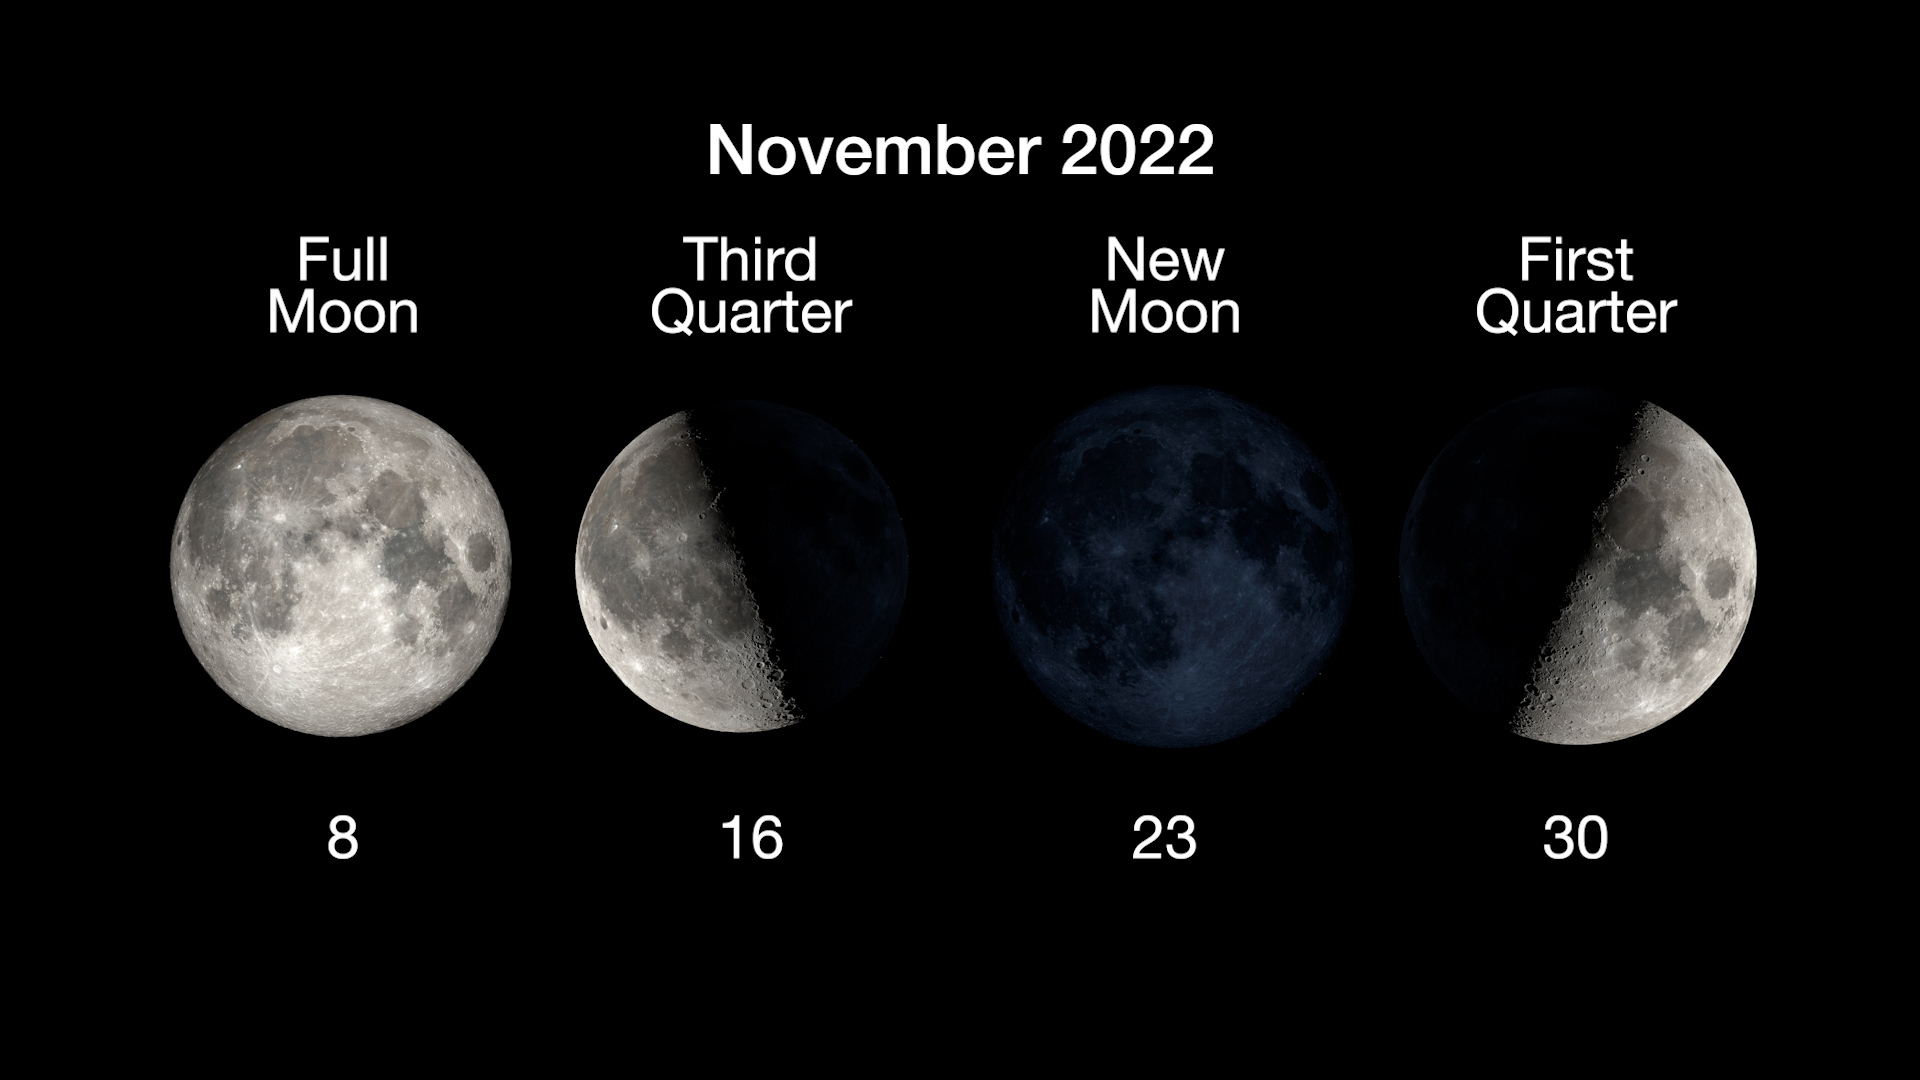 The four main phases of the Moon are illustrated in a horizontal row, with the full moon on November 8, third quarter on November 16, new moon on November 23, and first quarter on November 30. 